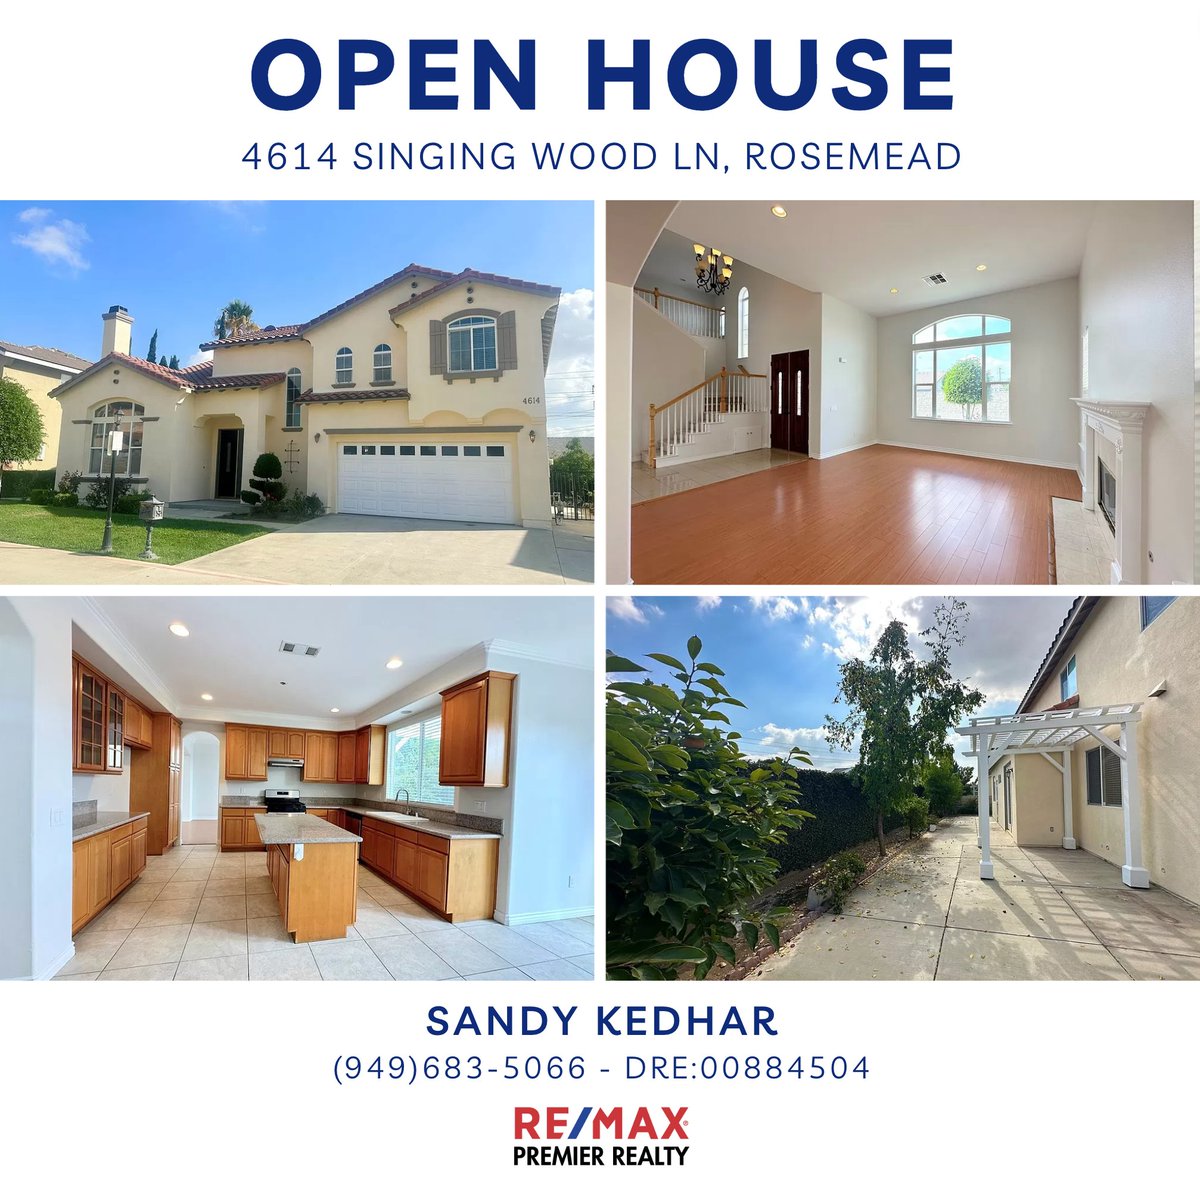 📷 Join us this weekend for an exclusive open house at 4614 Singing Wood Lane, Rosemead, CA 91770.

📷 Sunday, Dec10th, from 12 PM to 4 PM, and next Saturday, December 16th, from 1 PM to 4:30 PM.

For more info, feel free to call Sandy at 949-683-5066.

#RealEstate #OpenHouse